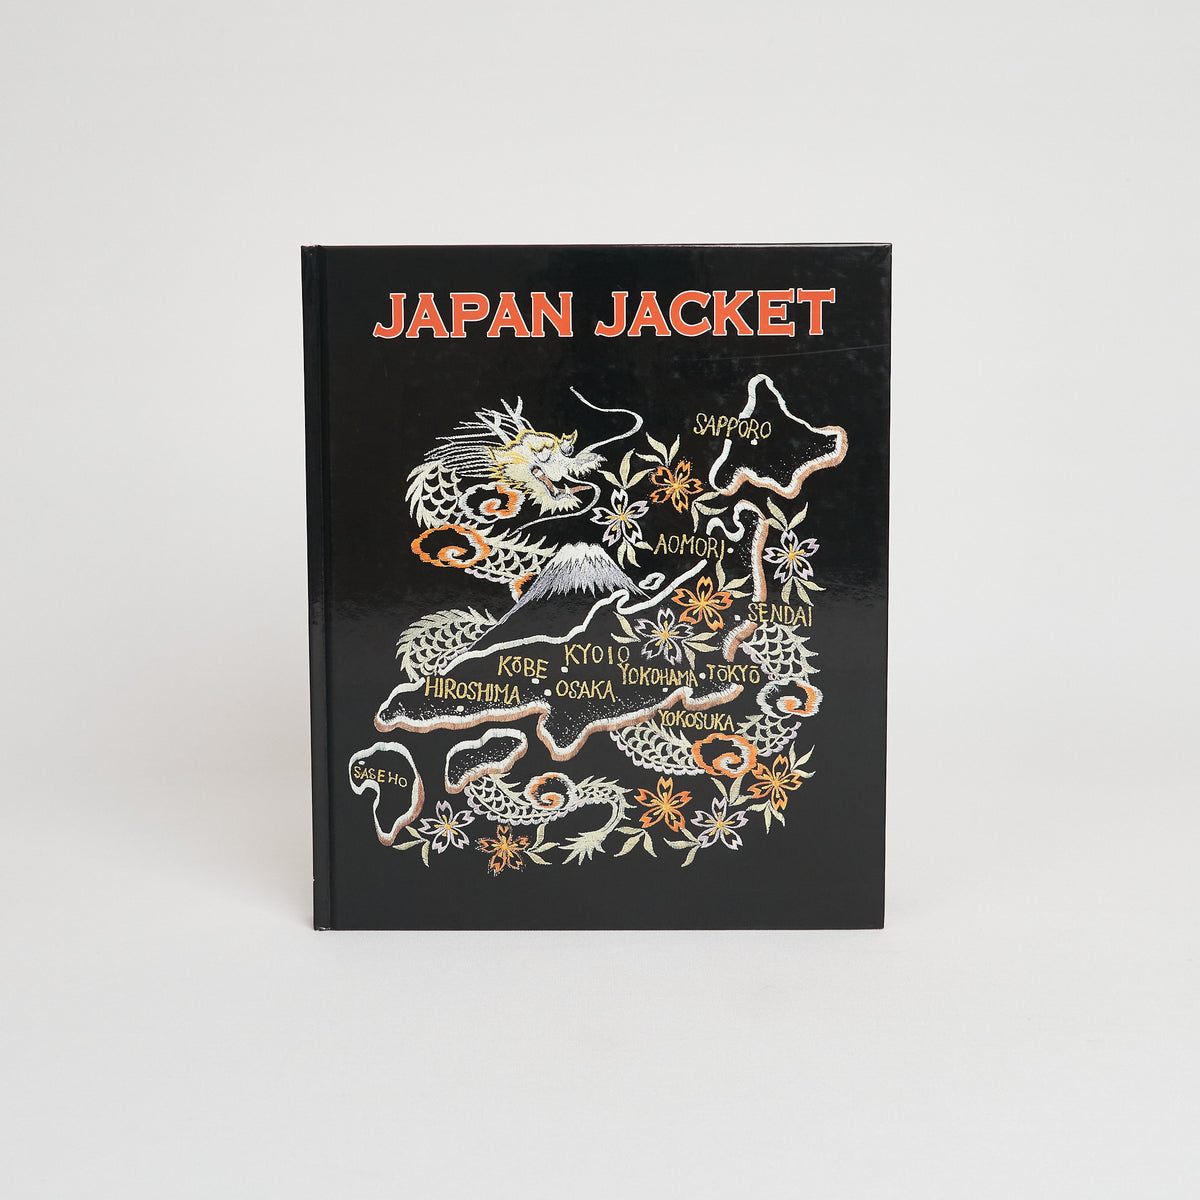 Japan Jacket – Embroidered Souvenir Jackets, Tailor Toyo